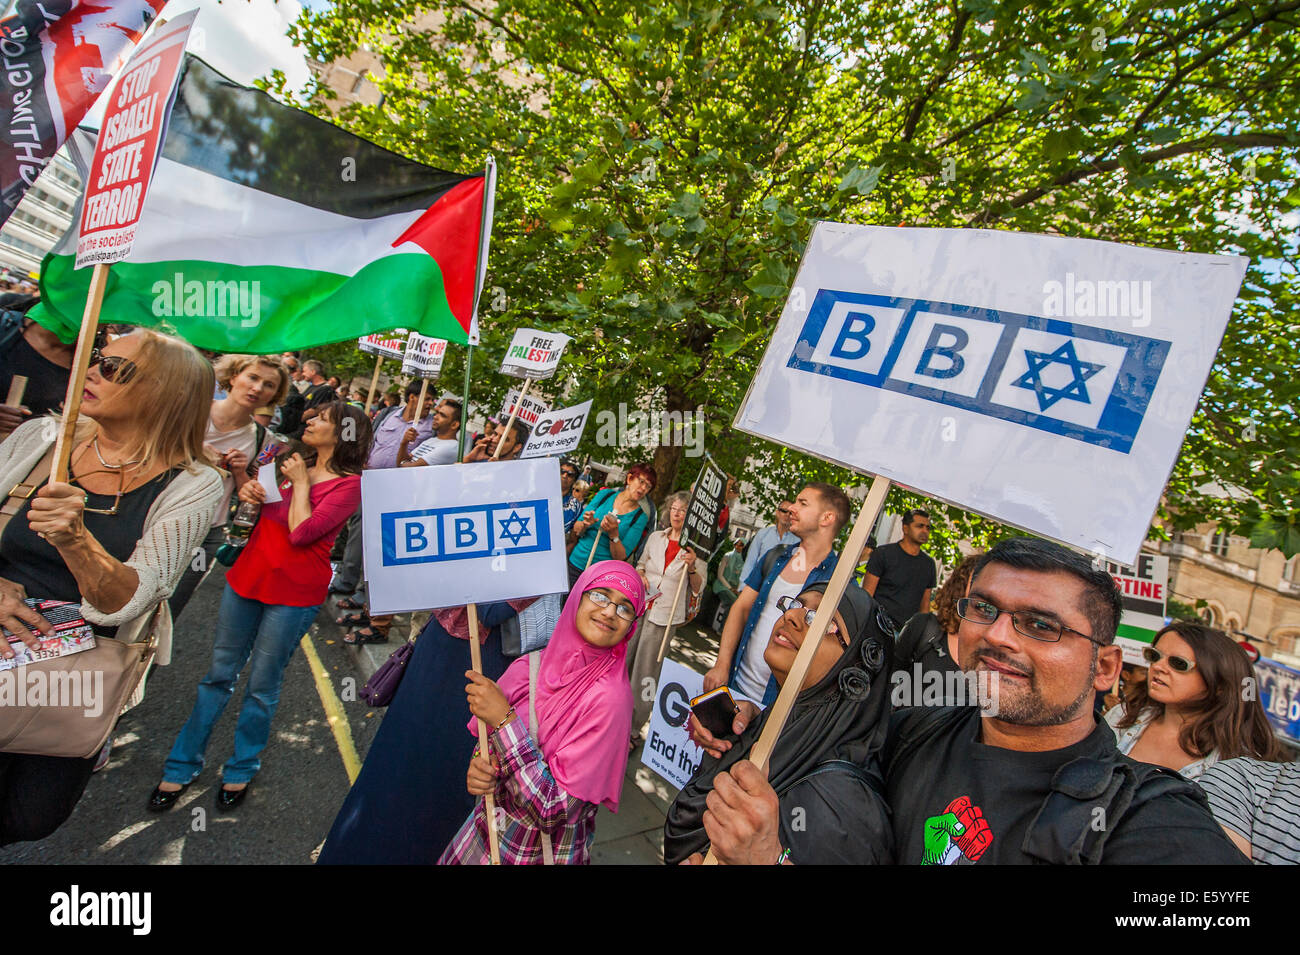 London, UK. 9th august, 2014. Outside the BBC a huge flag is unfurled and as the march heads off peace signs alternate with pointing and chanting - Shame on you. Stop the 'massacre' in Gaza protest. A demonstration called by the Palestine Solidarity Campaign (PSC). They assembled at the BBC offices in Regent Street and marched to The US Embassy and on to a rally in Hyde Park. They called for 'Israel's bombing and killing to stop now and for David Cameron to stop supporting Israeli war crimes'. London, 09 Aug 2014. Credit:  Guy Bell/Alamy Live News Stock Photo